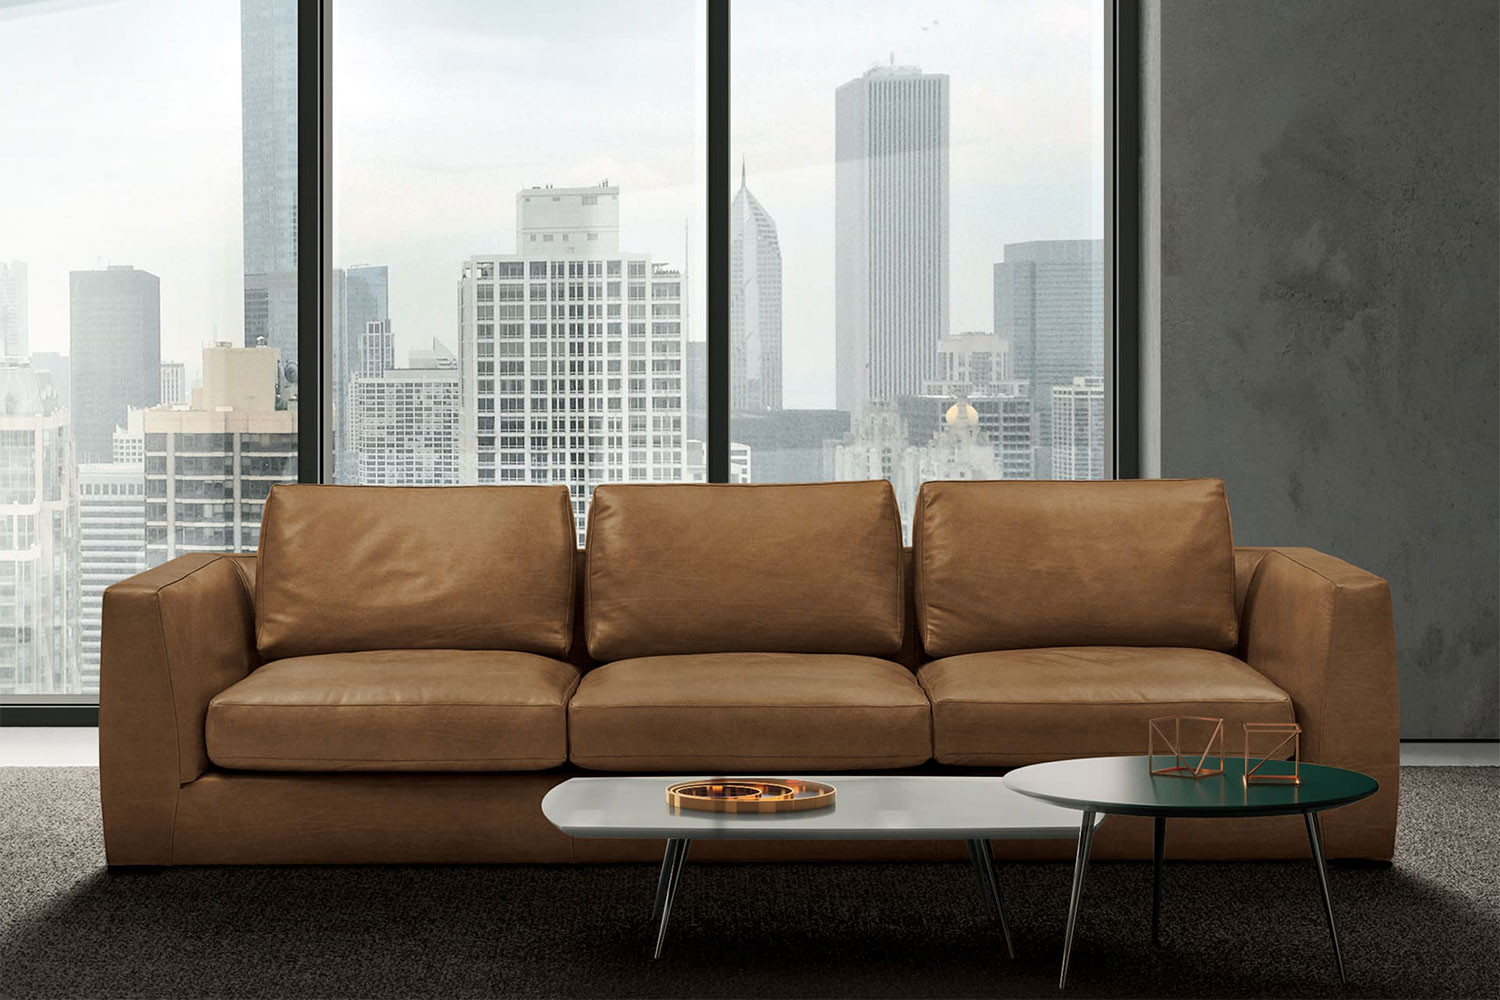 Modern Lawson style sofa that comes as a sectional, chaise end couch or as a 2, 3, 4, 5 or more seater